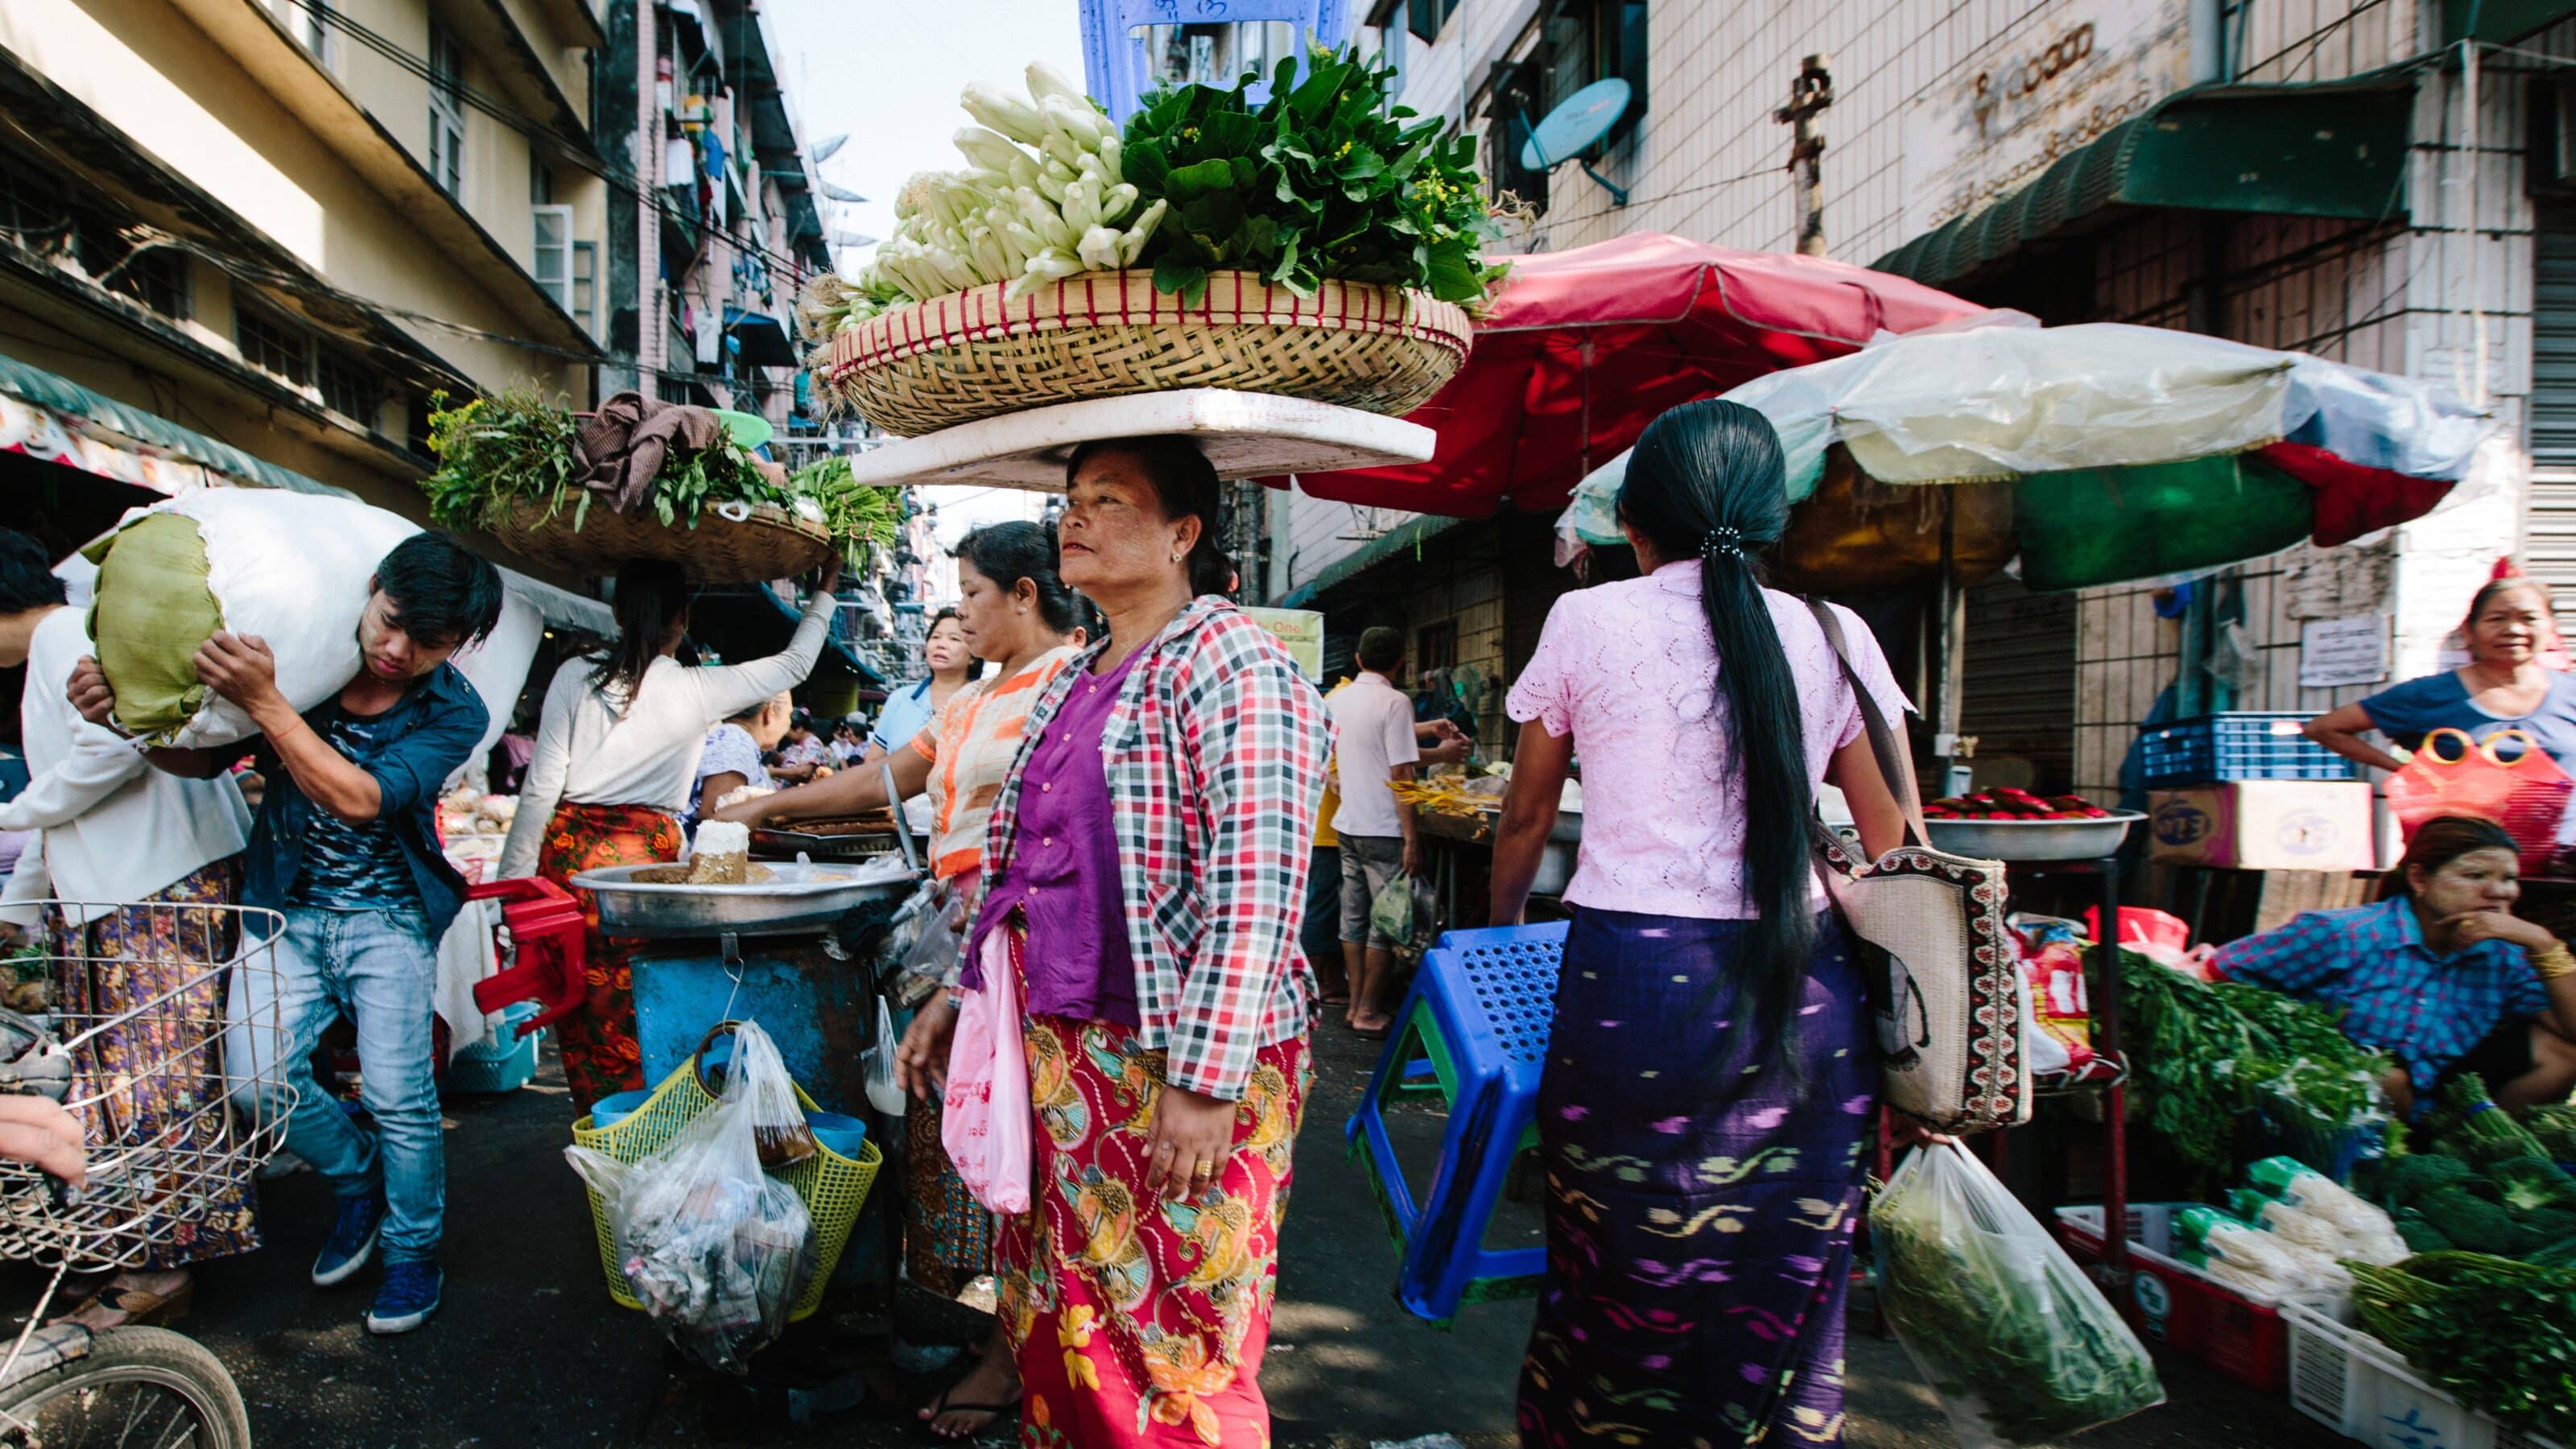 How To Photograph Street Markets